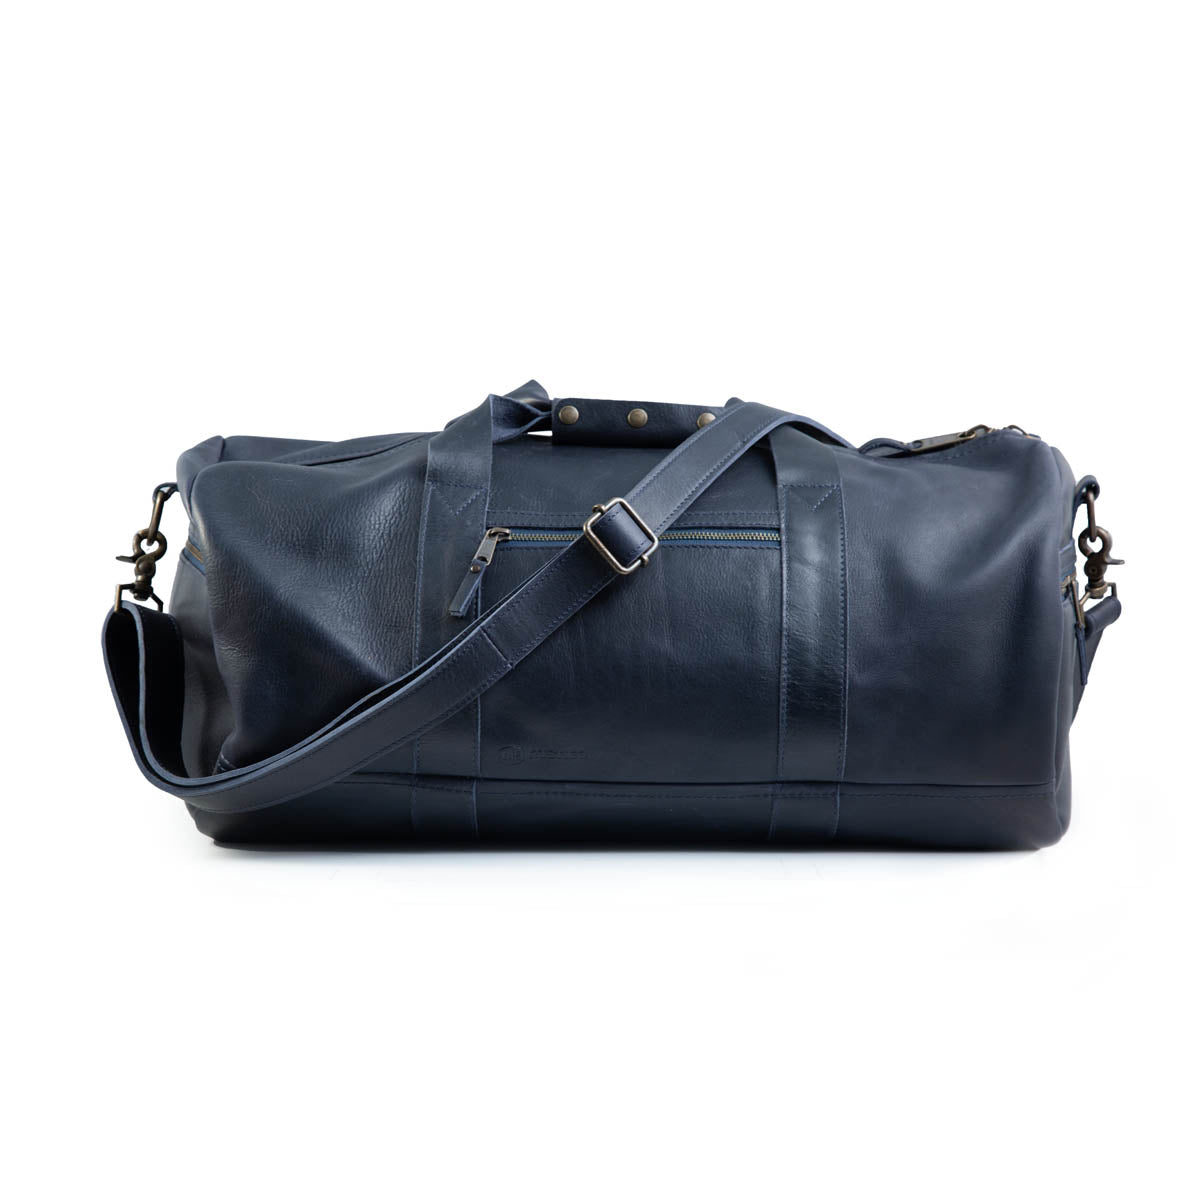 Men's Nappa Leather Duffle Bag in Black by Quince